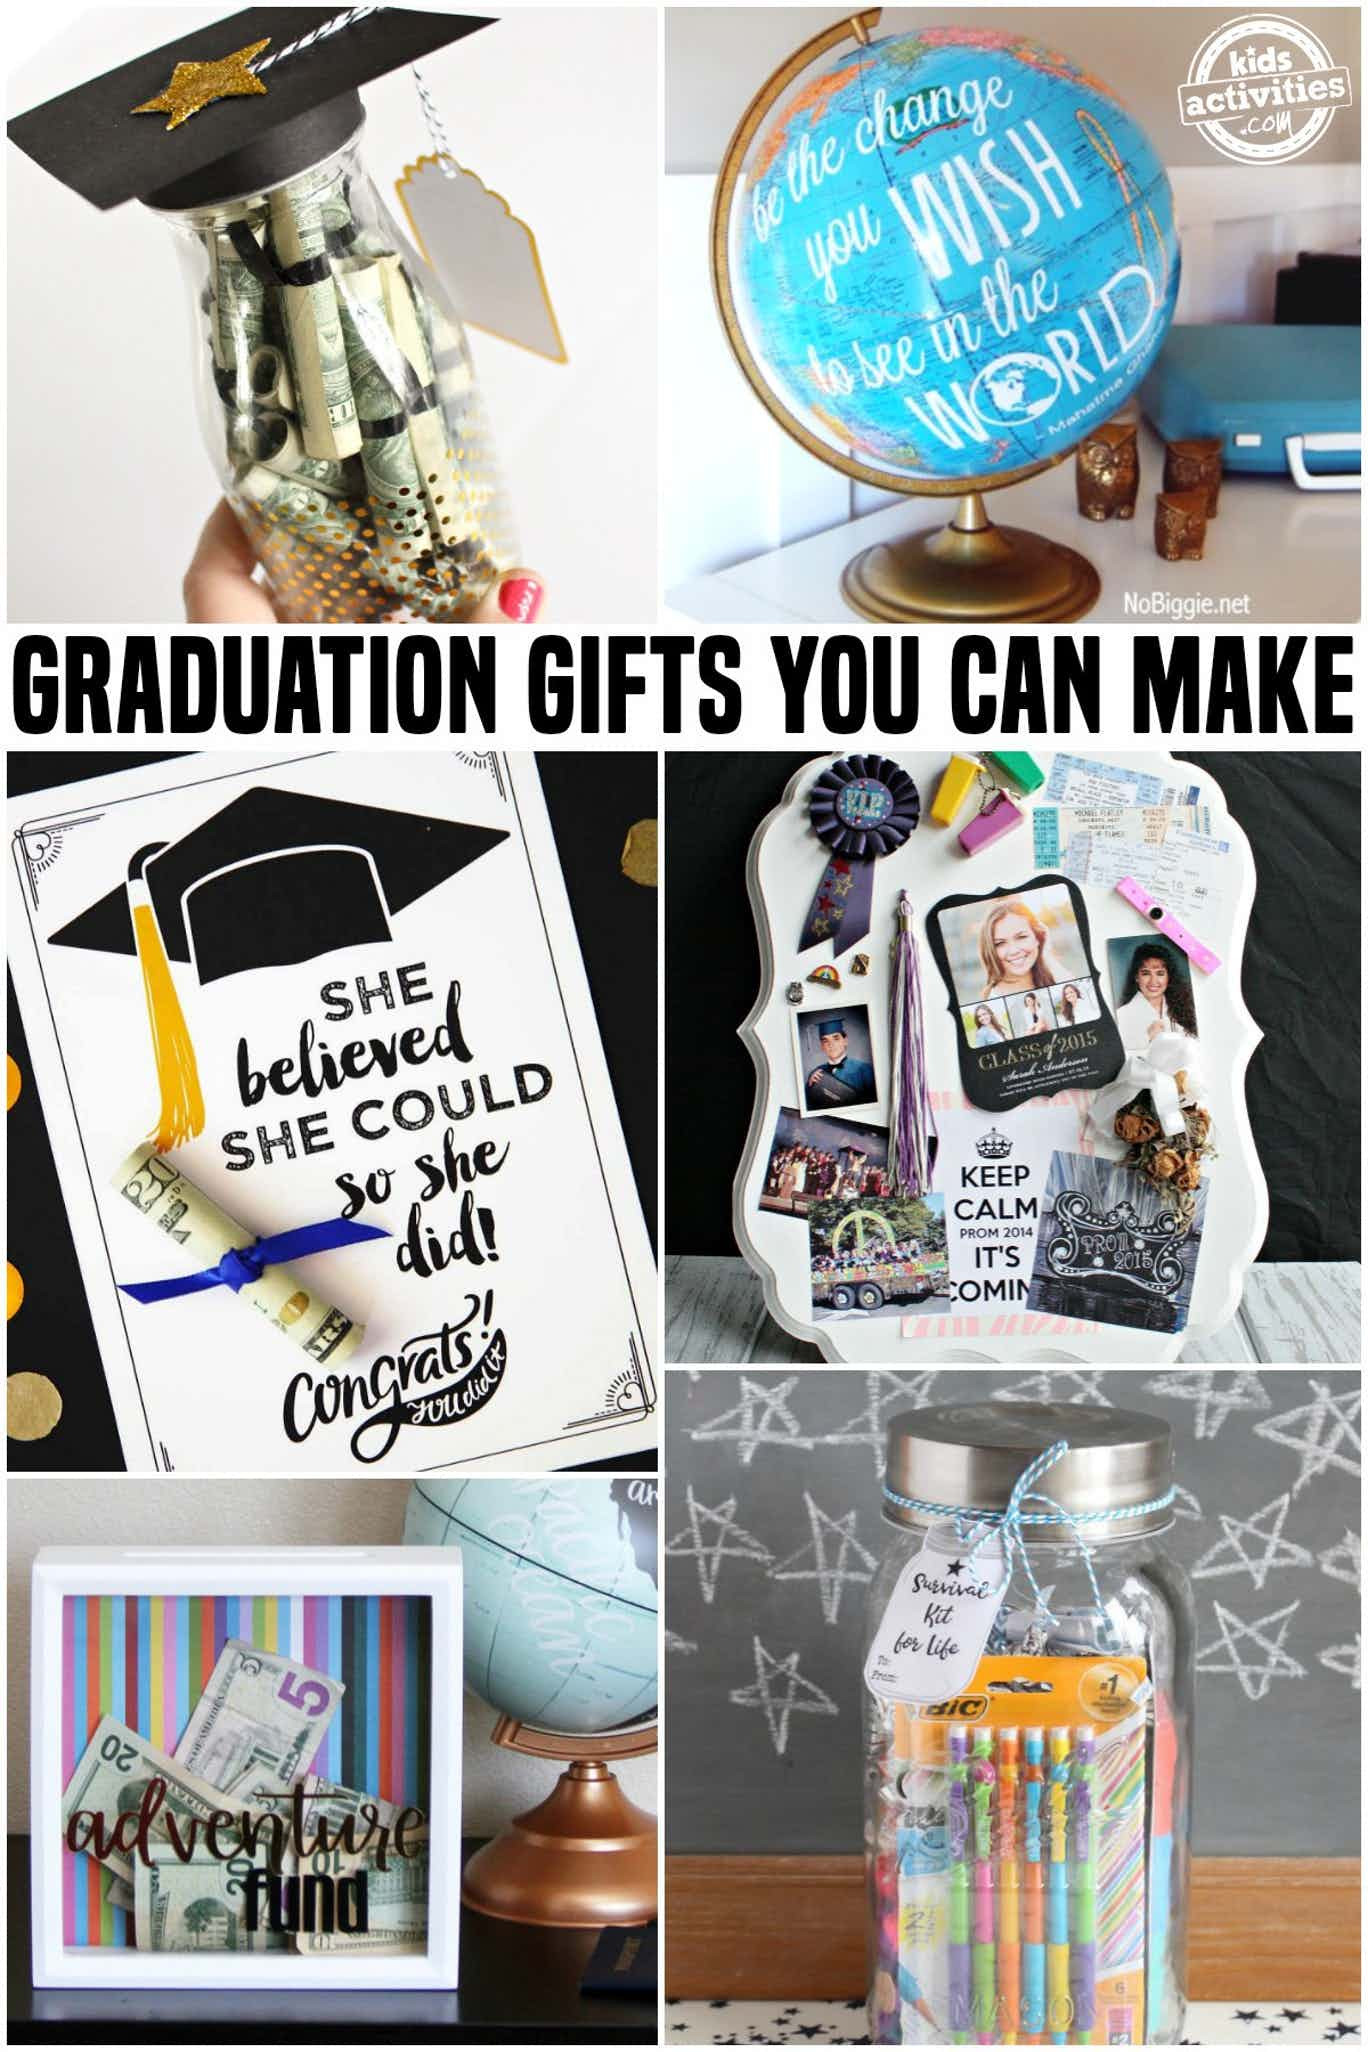 Graduation Gift Ideas
 Awesome Graduation Gifts You Can Make At Home